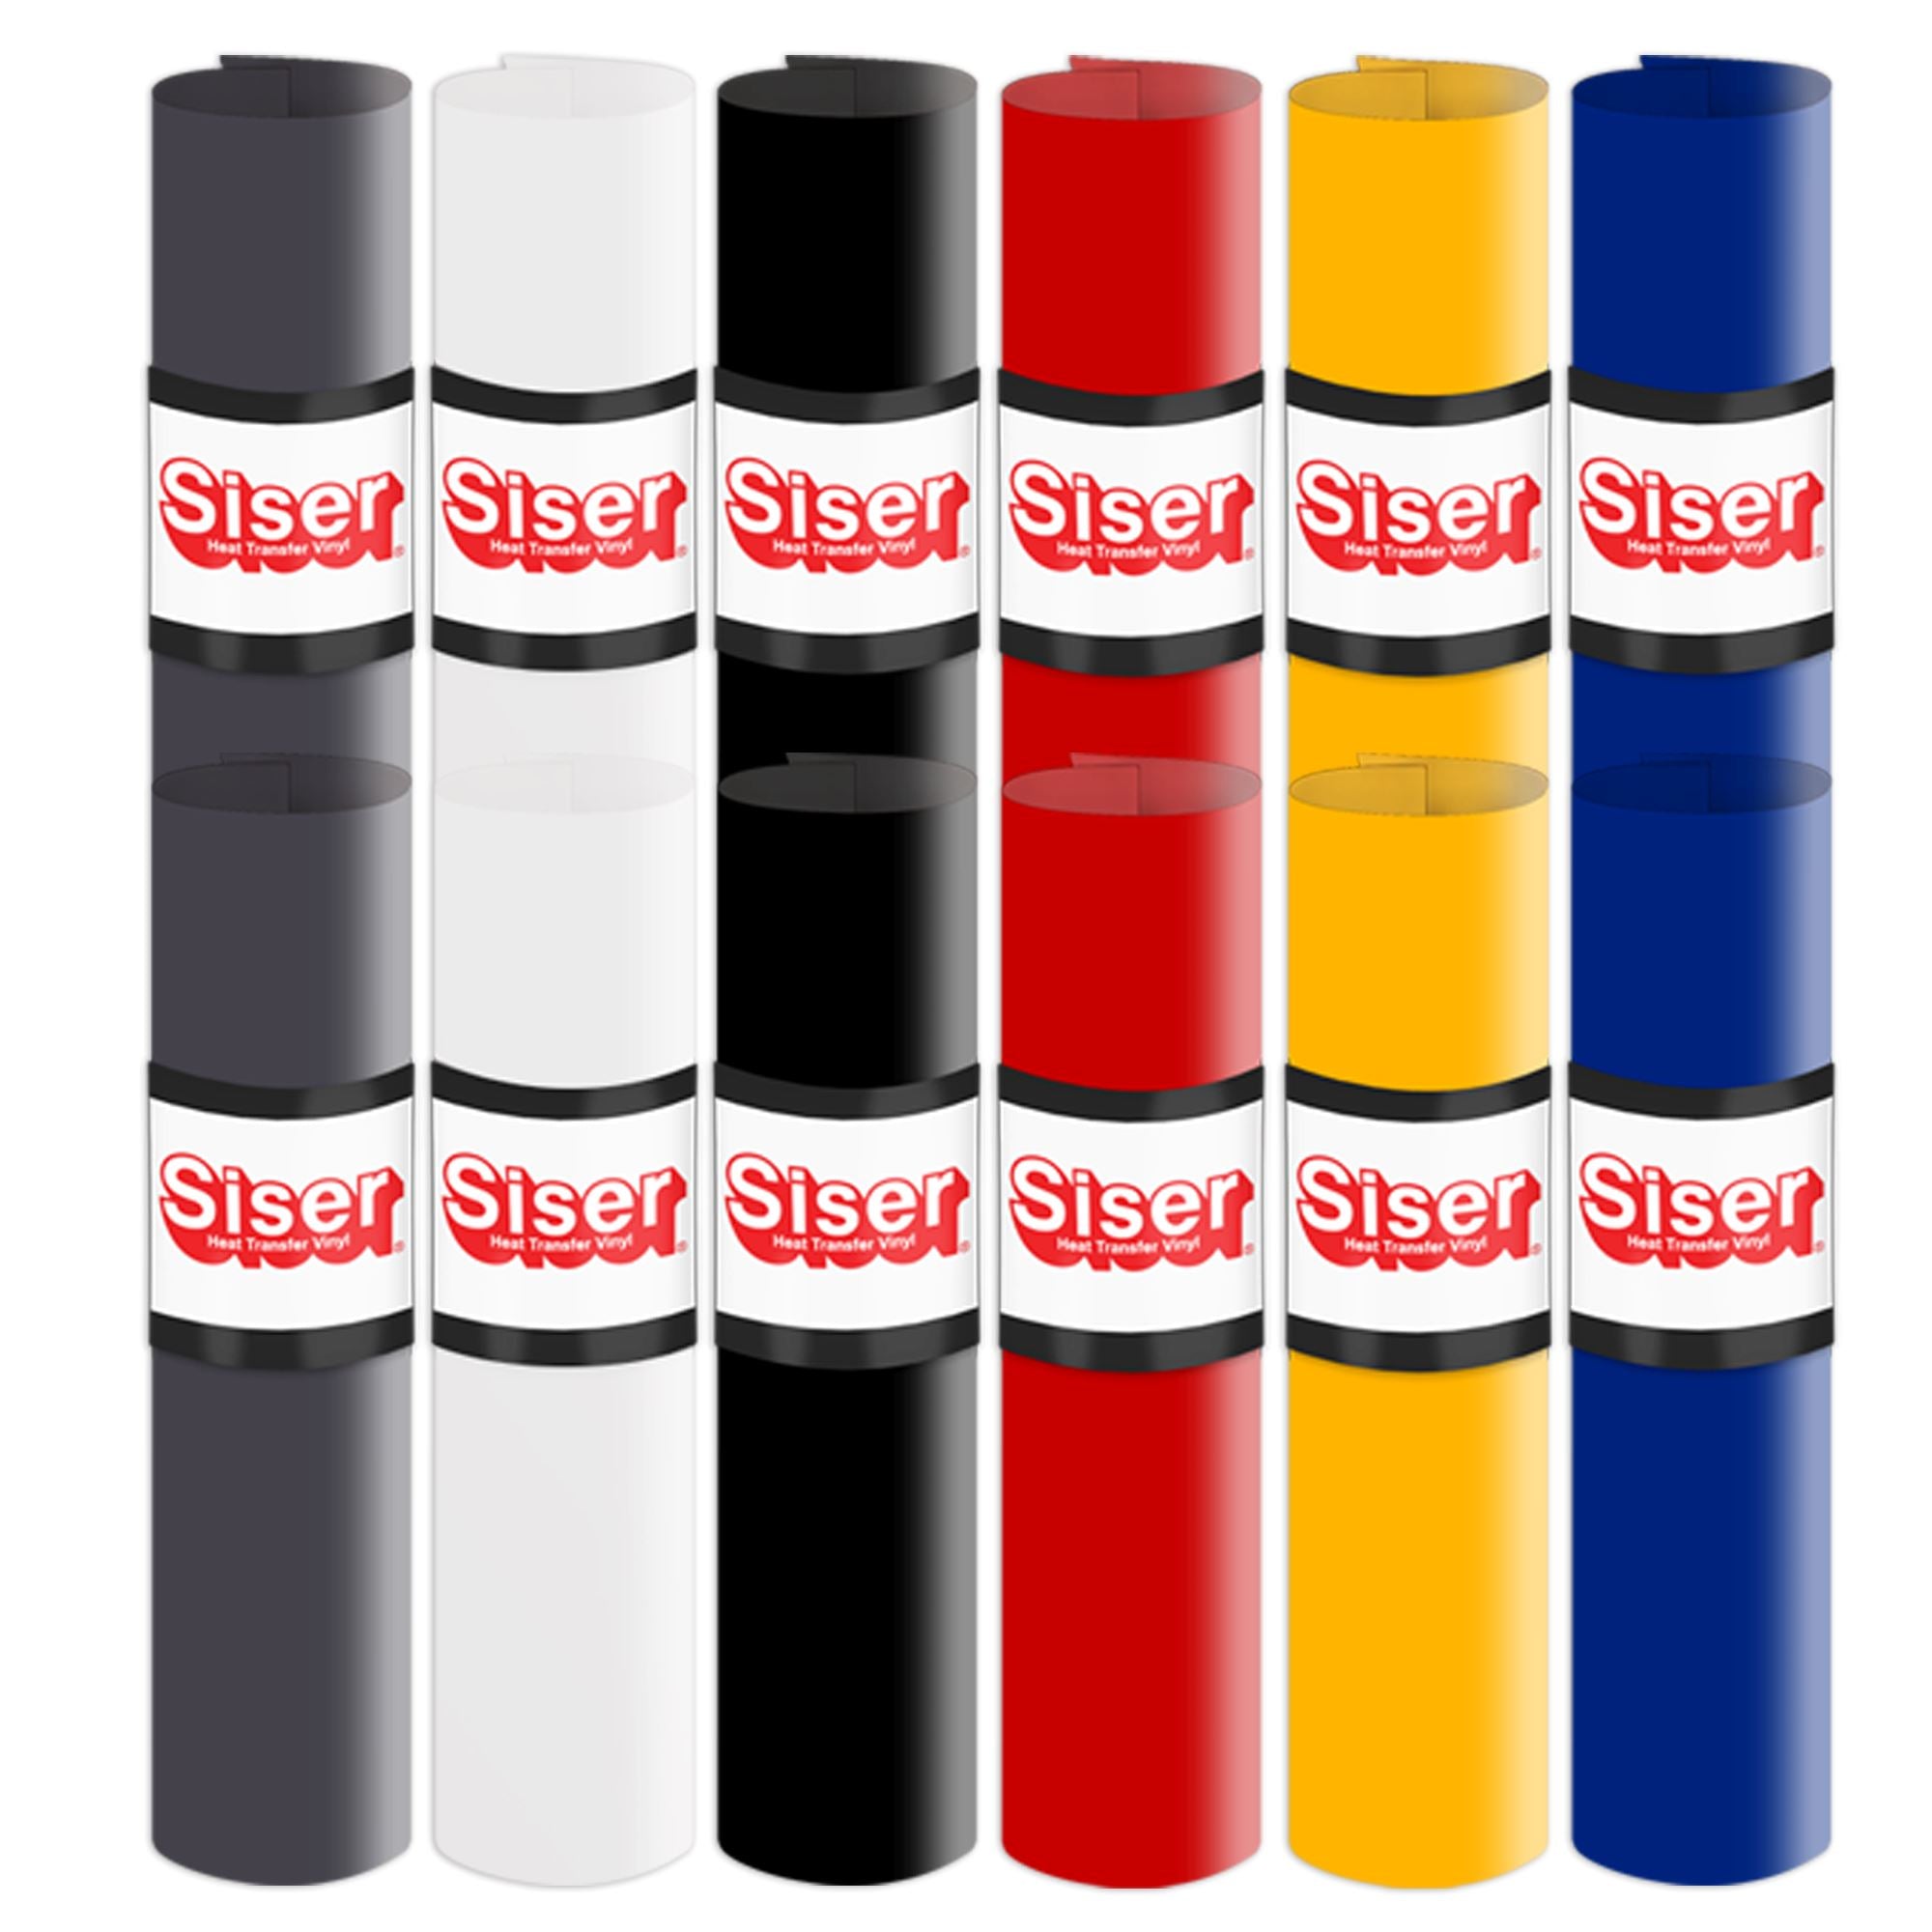 Siser EasyWeed Heat Transfer Vinyl 11.8 x 15ft Roll (White) - Compatible  with Siser Romeo/Juliet & Other Professional or Craft Cutters - Layerable 